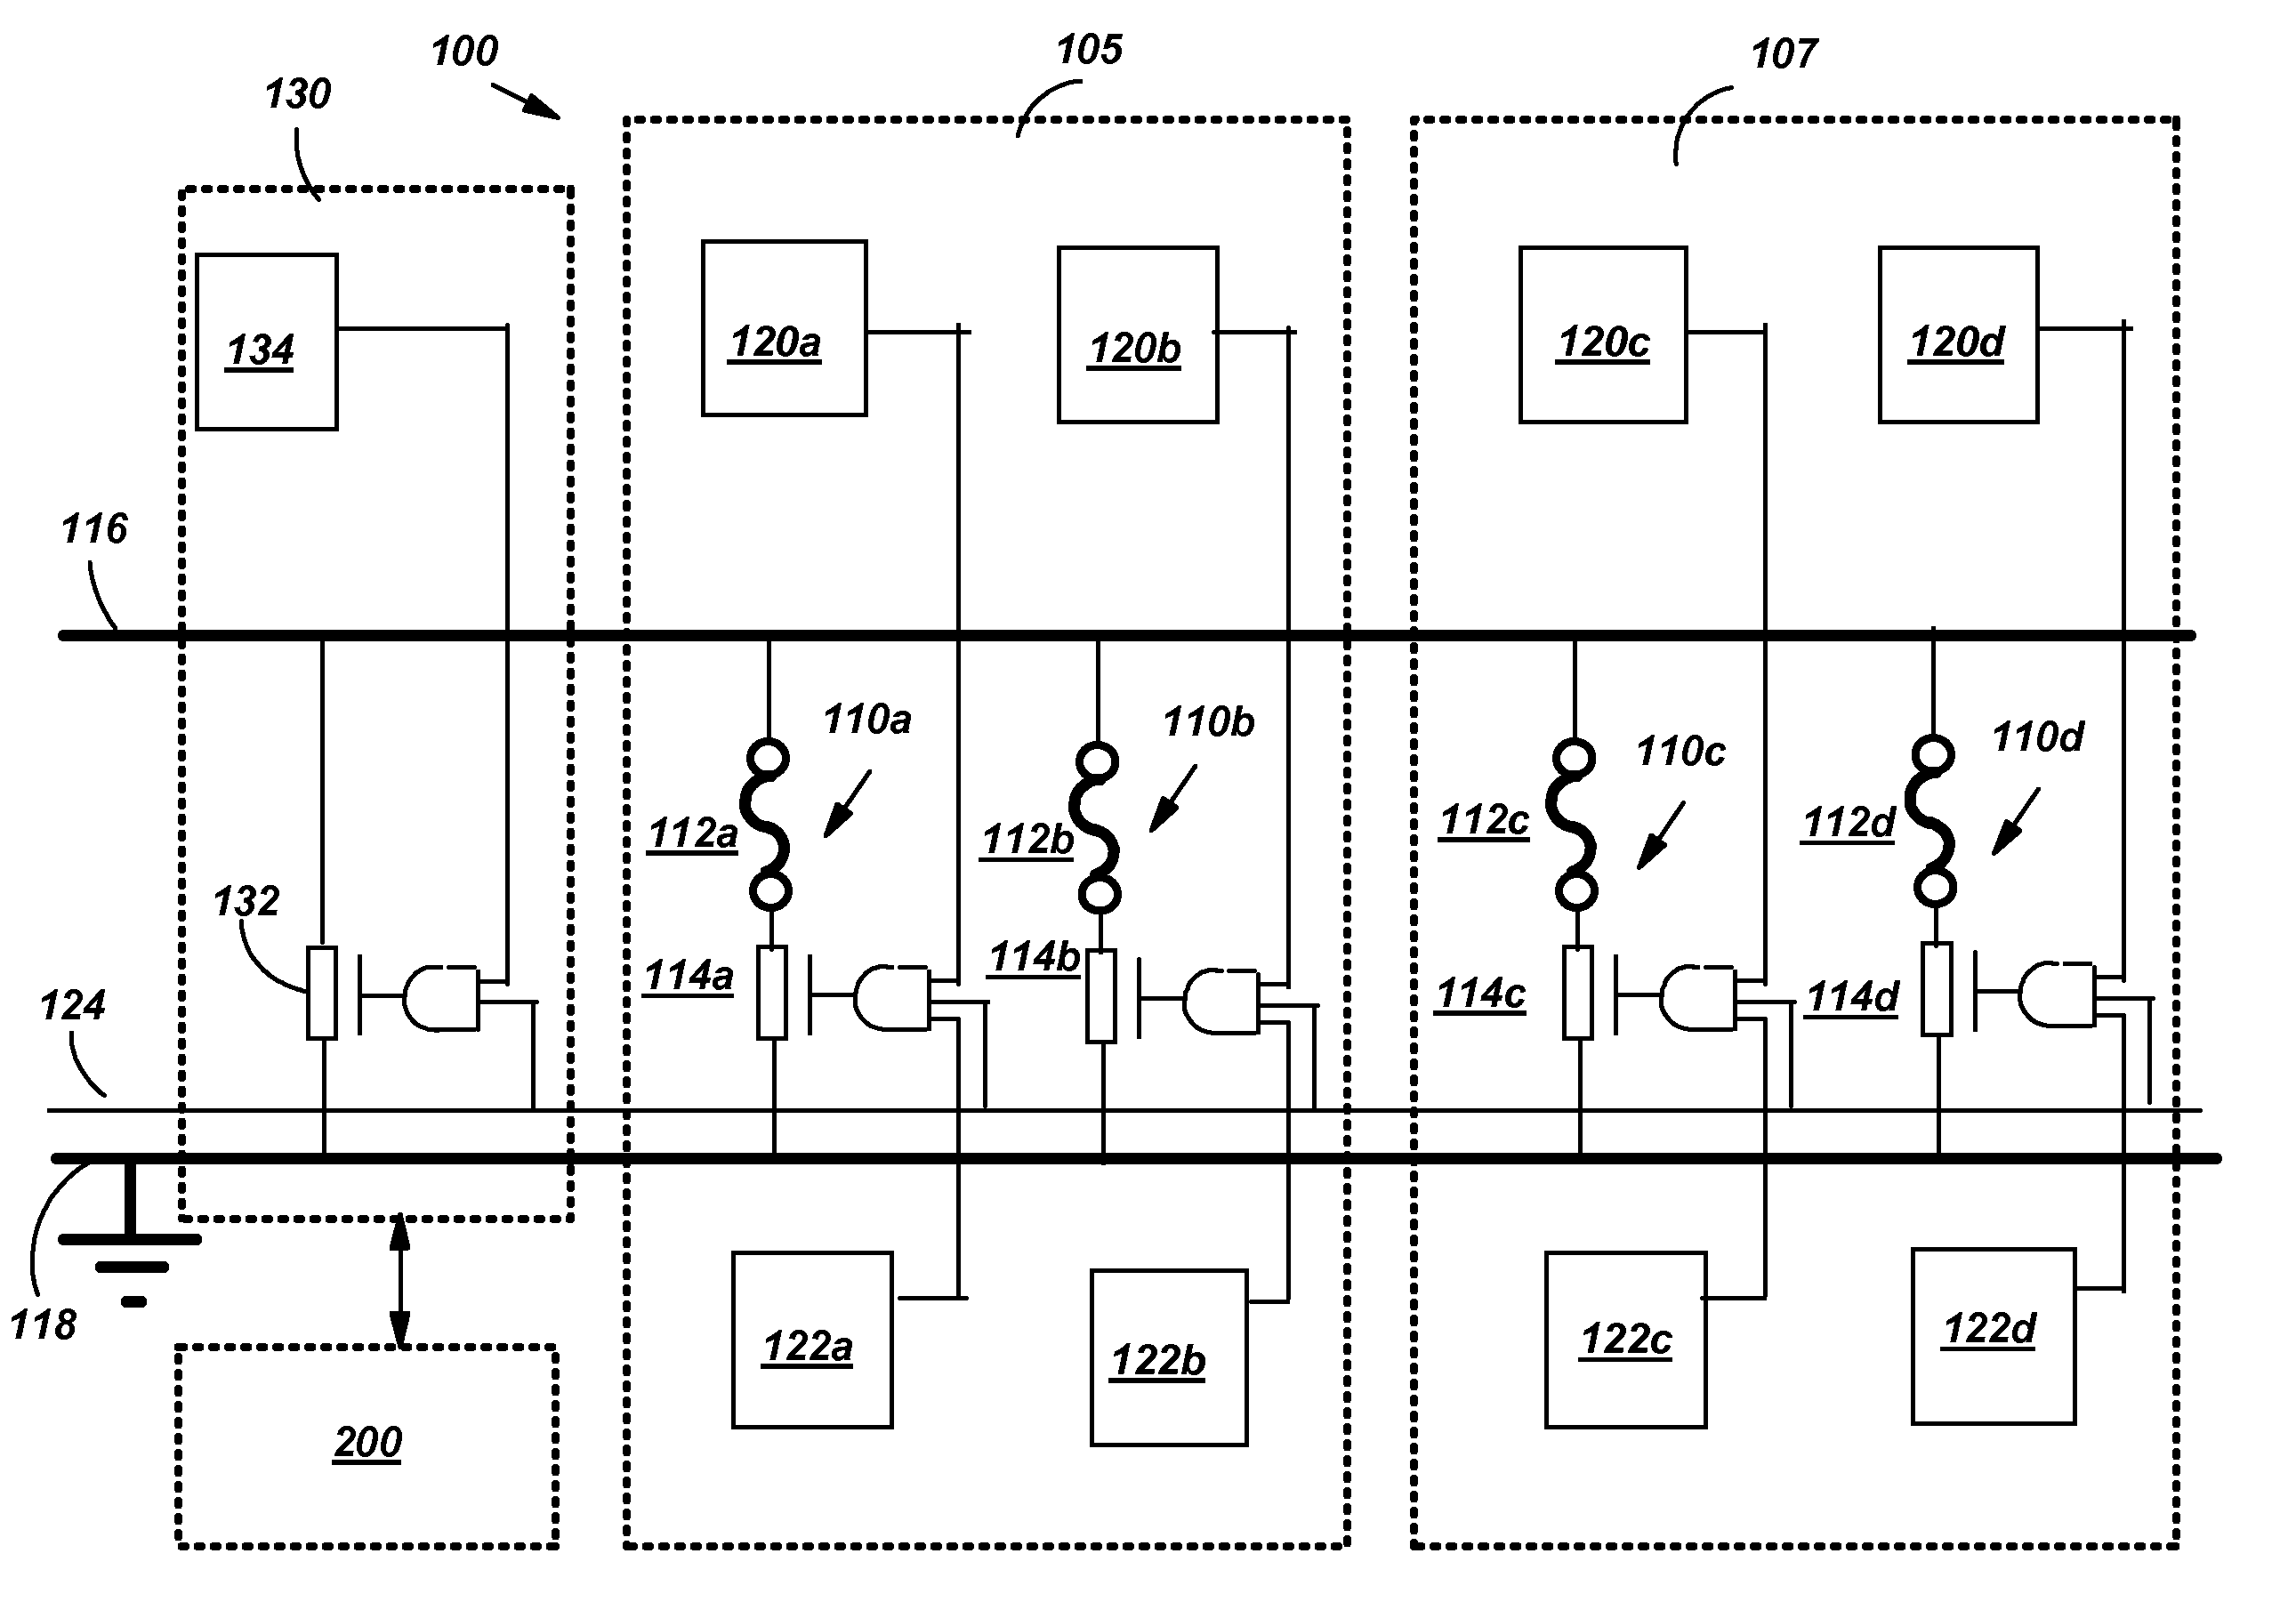 Electronic fuse blow mimic and methods for adjusting electronic fuse blow